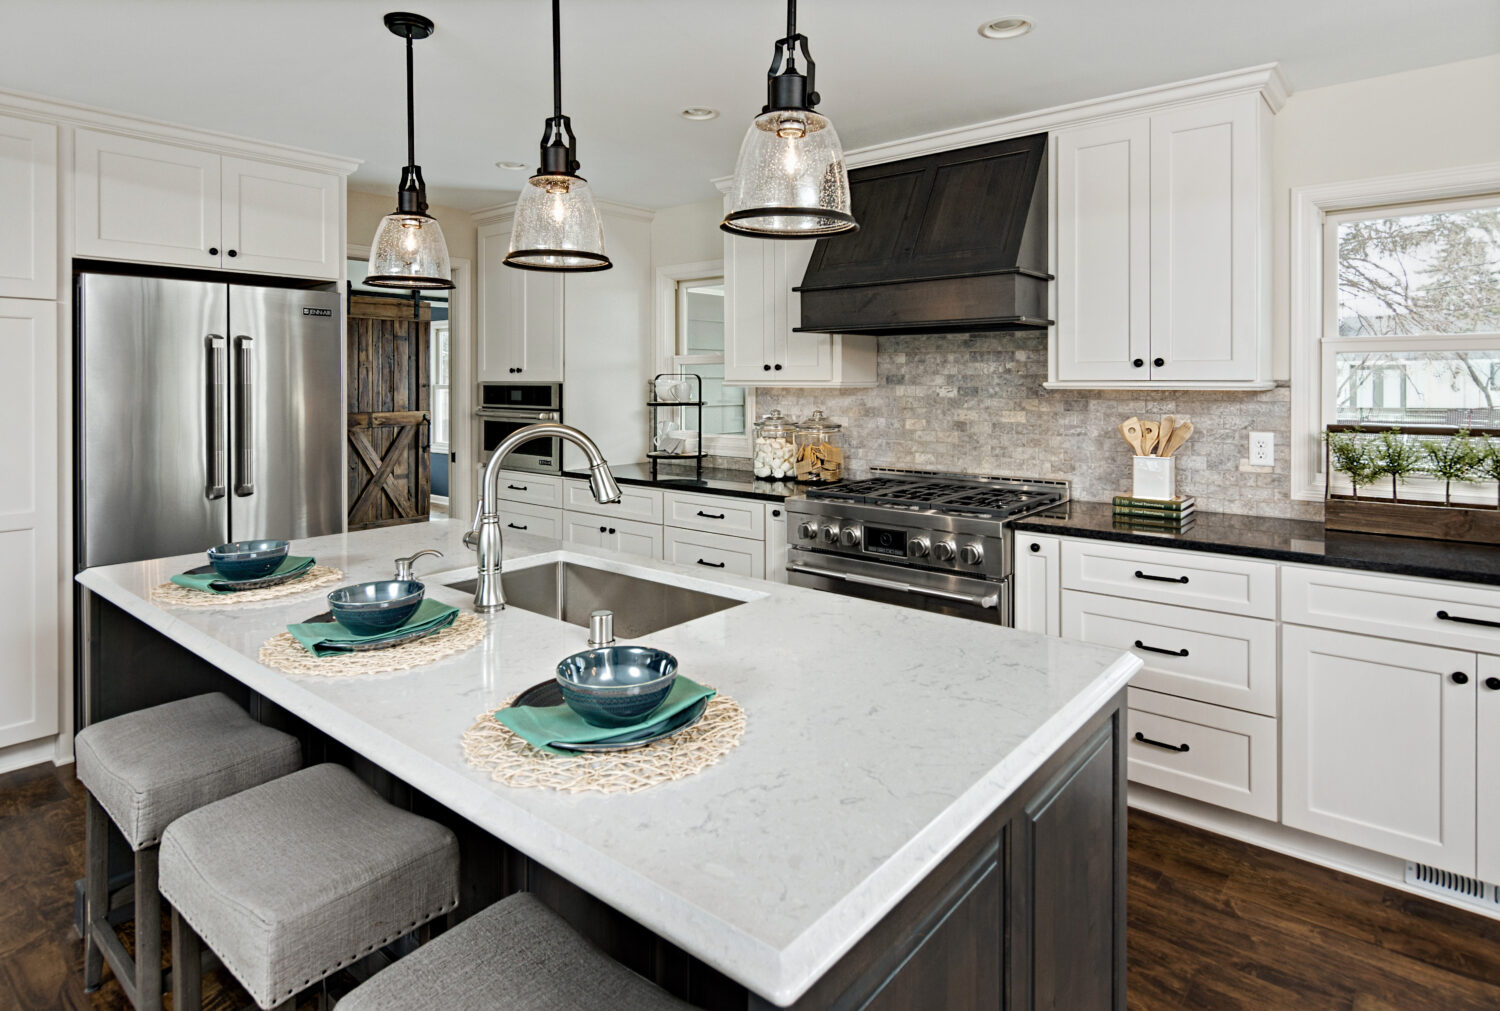 A kitchen island with seating for three with a sink across from the cooktop and gray stained wood hood surrounded by white painted cabinets.